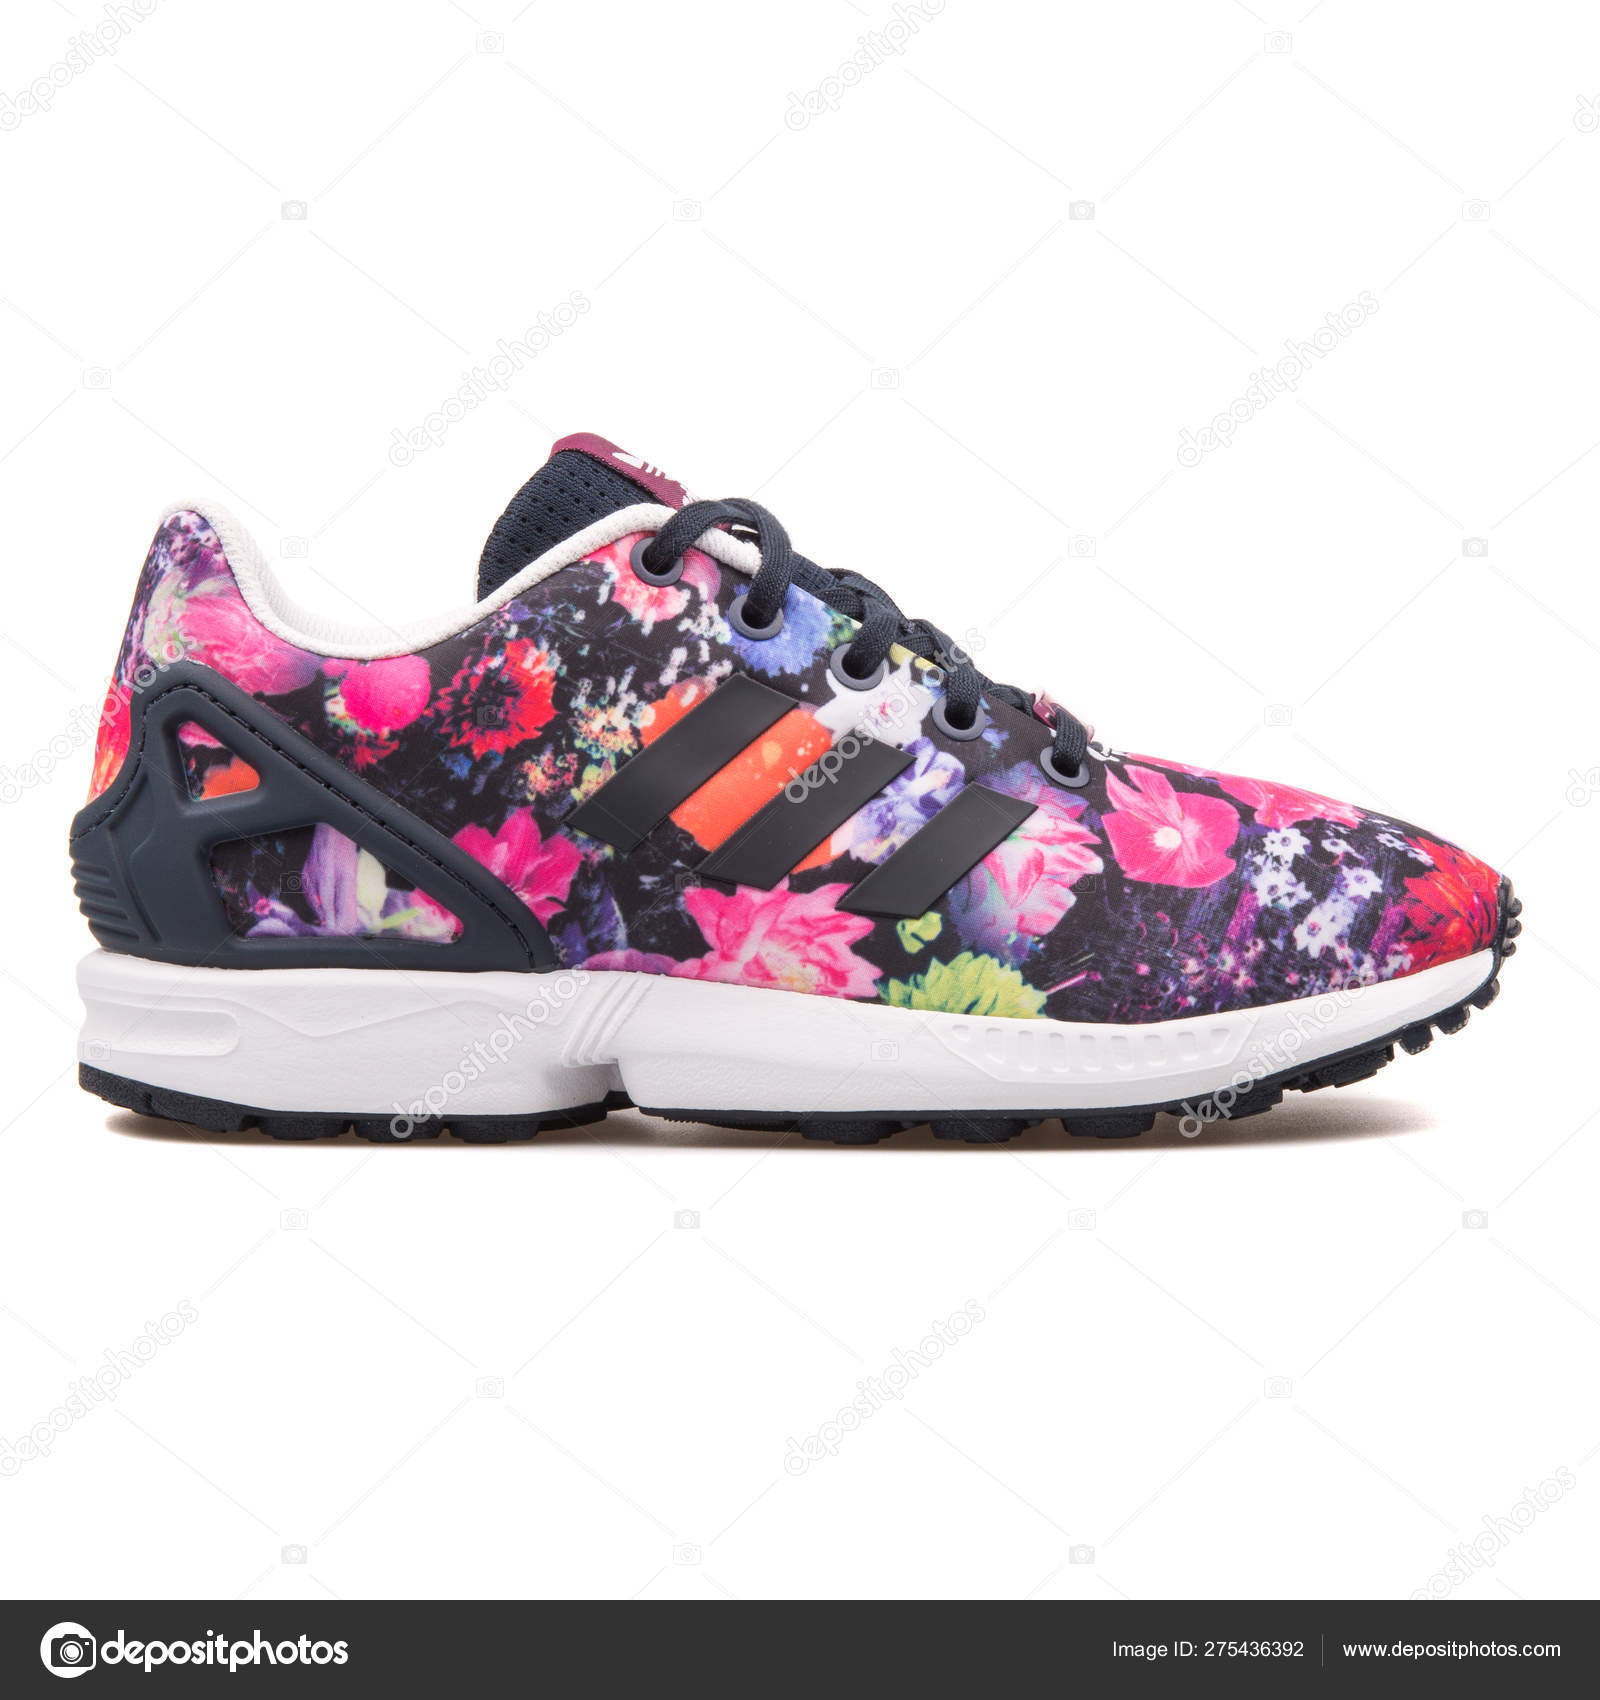 adidas zx floral